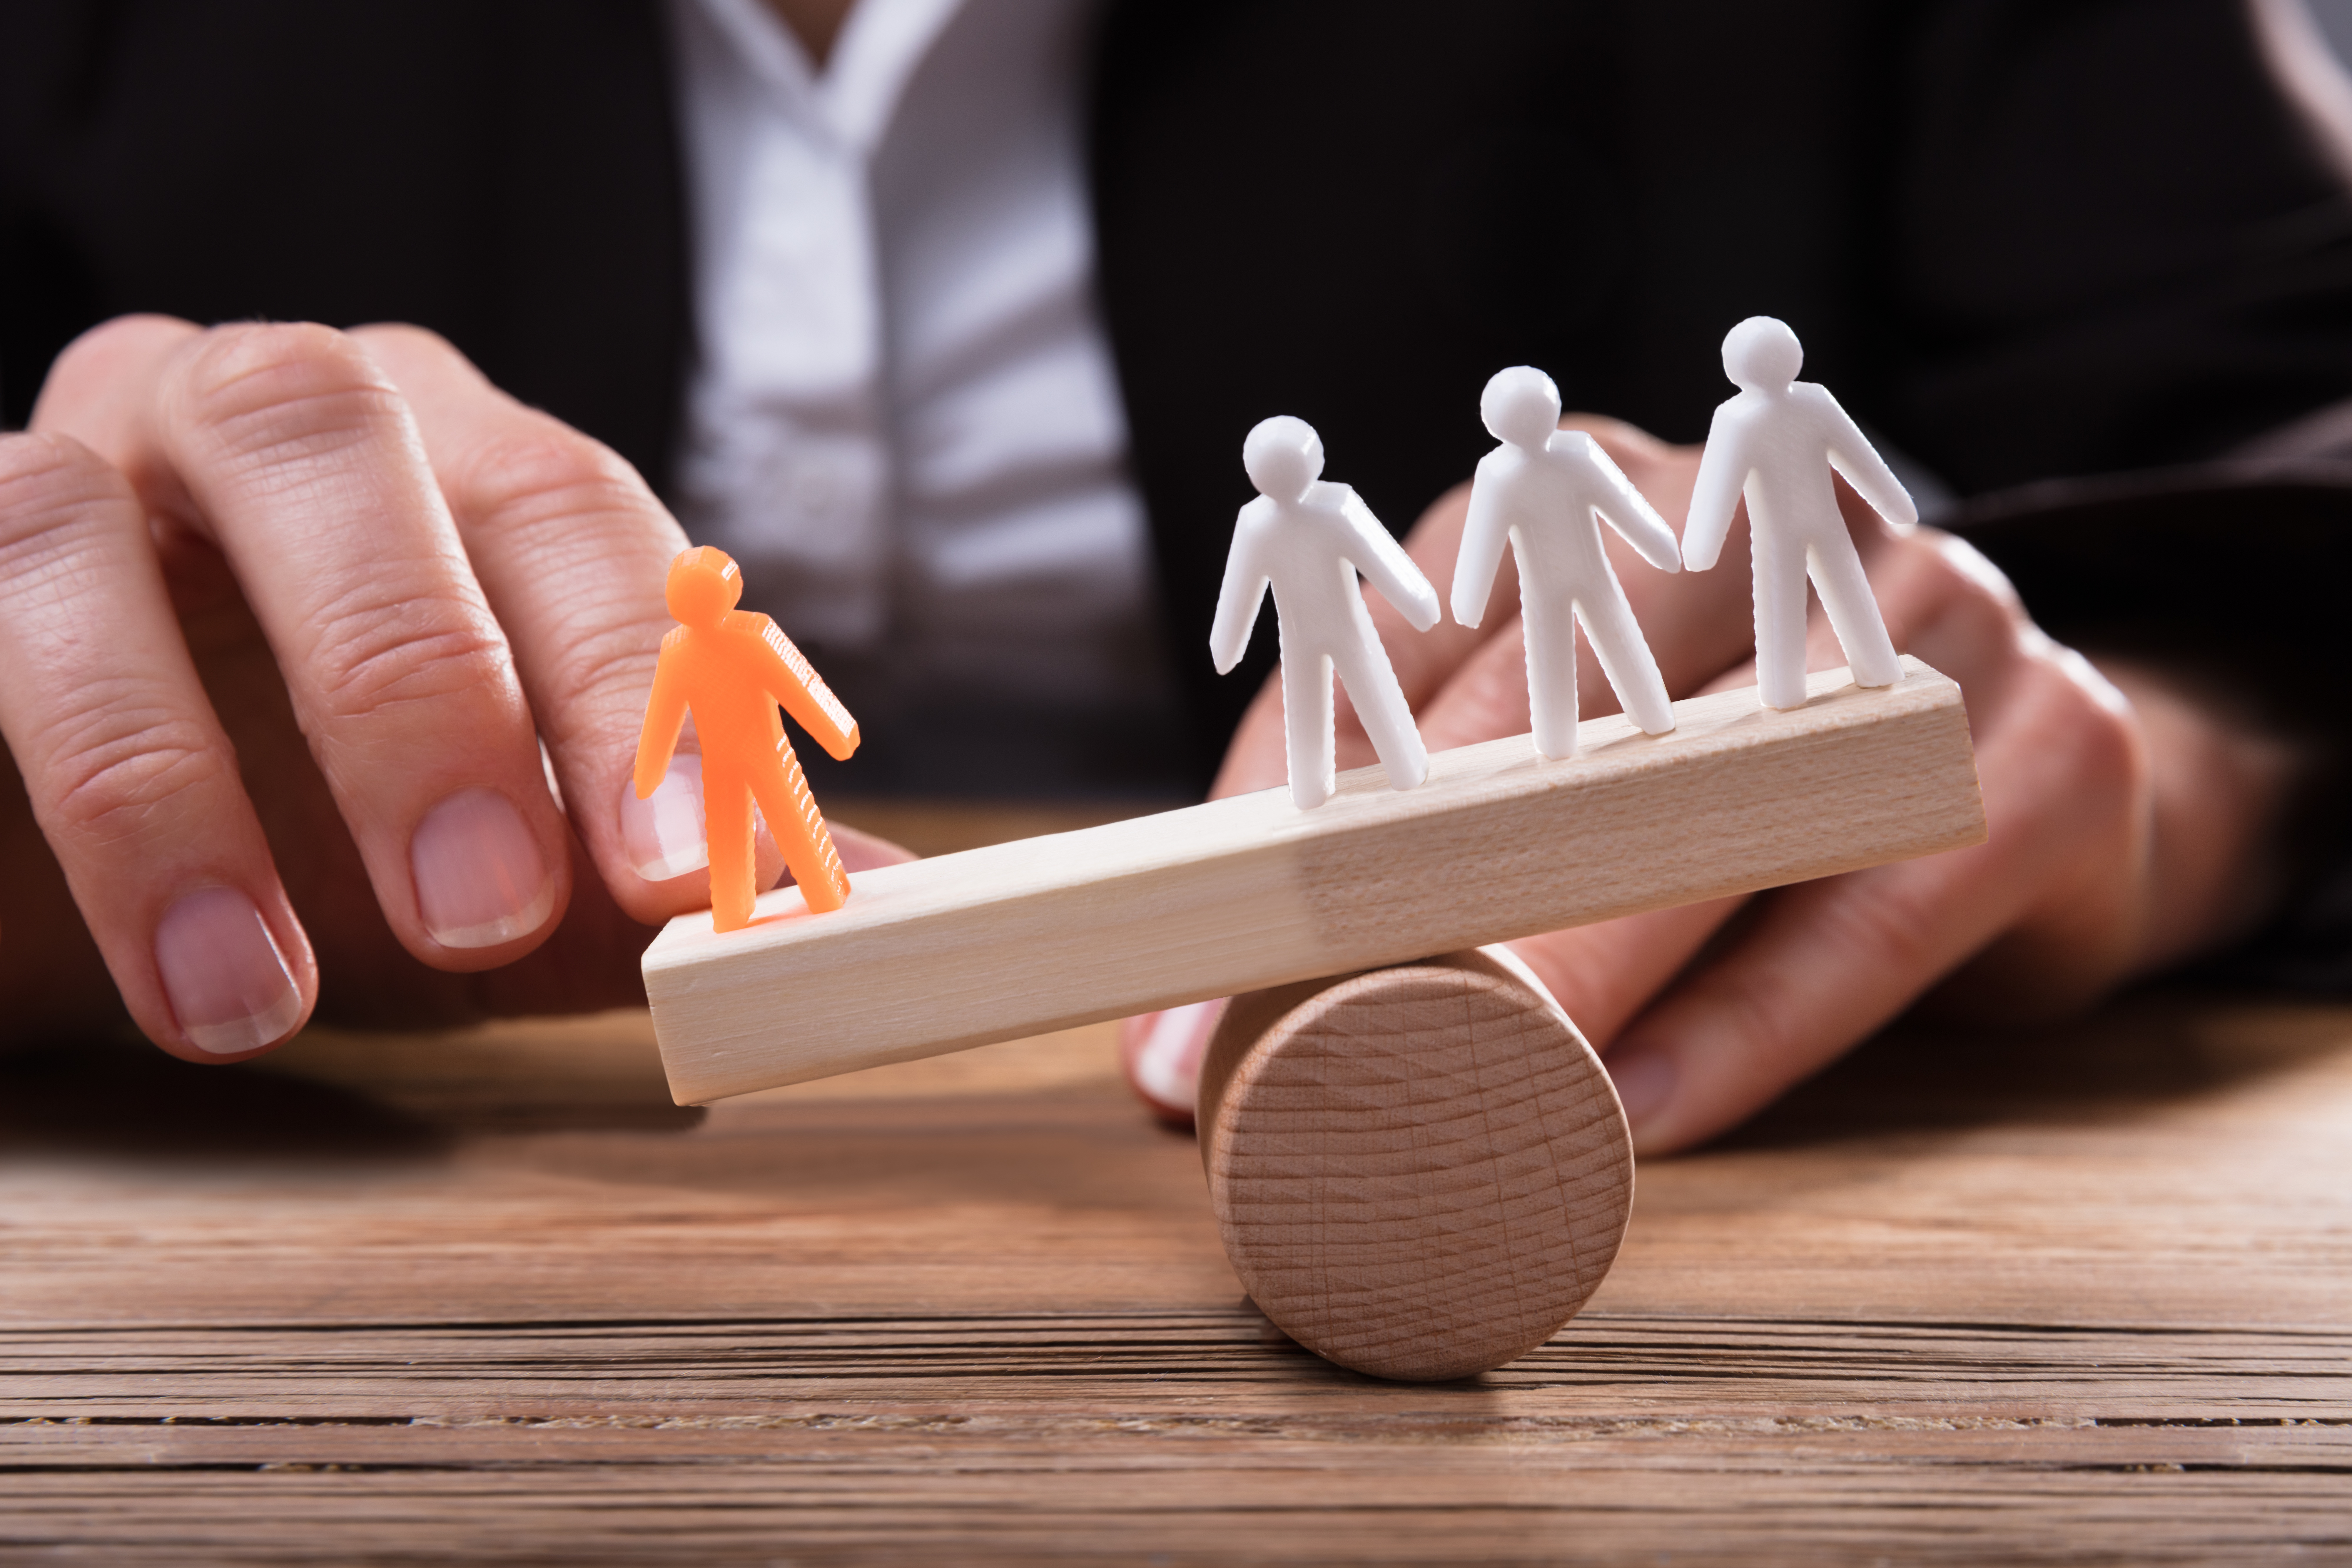 Close-up Of Businessperson Showing Orange Figure Against White Human Figures On Seesaw Over Wooden Desk